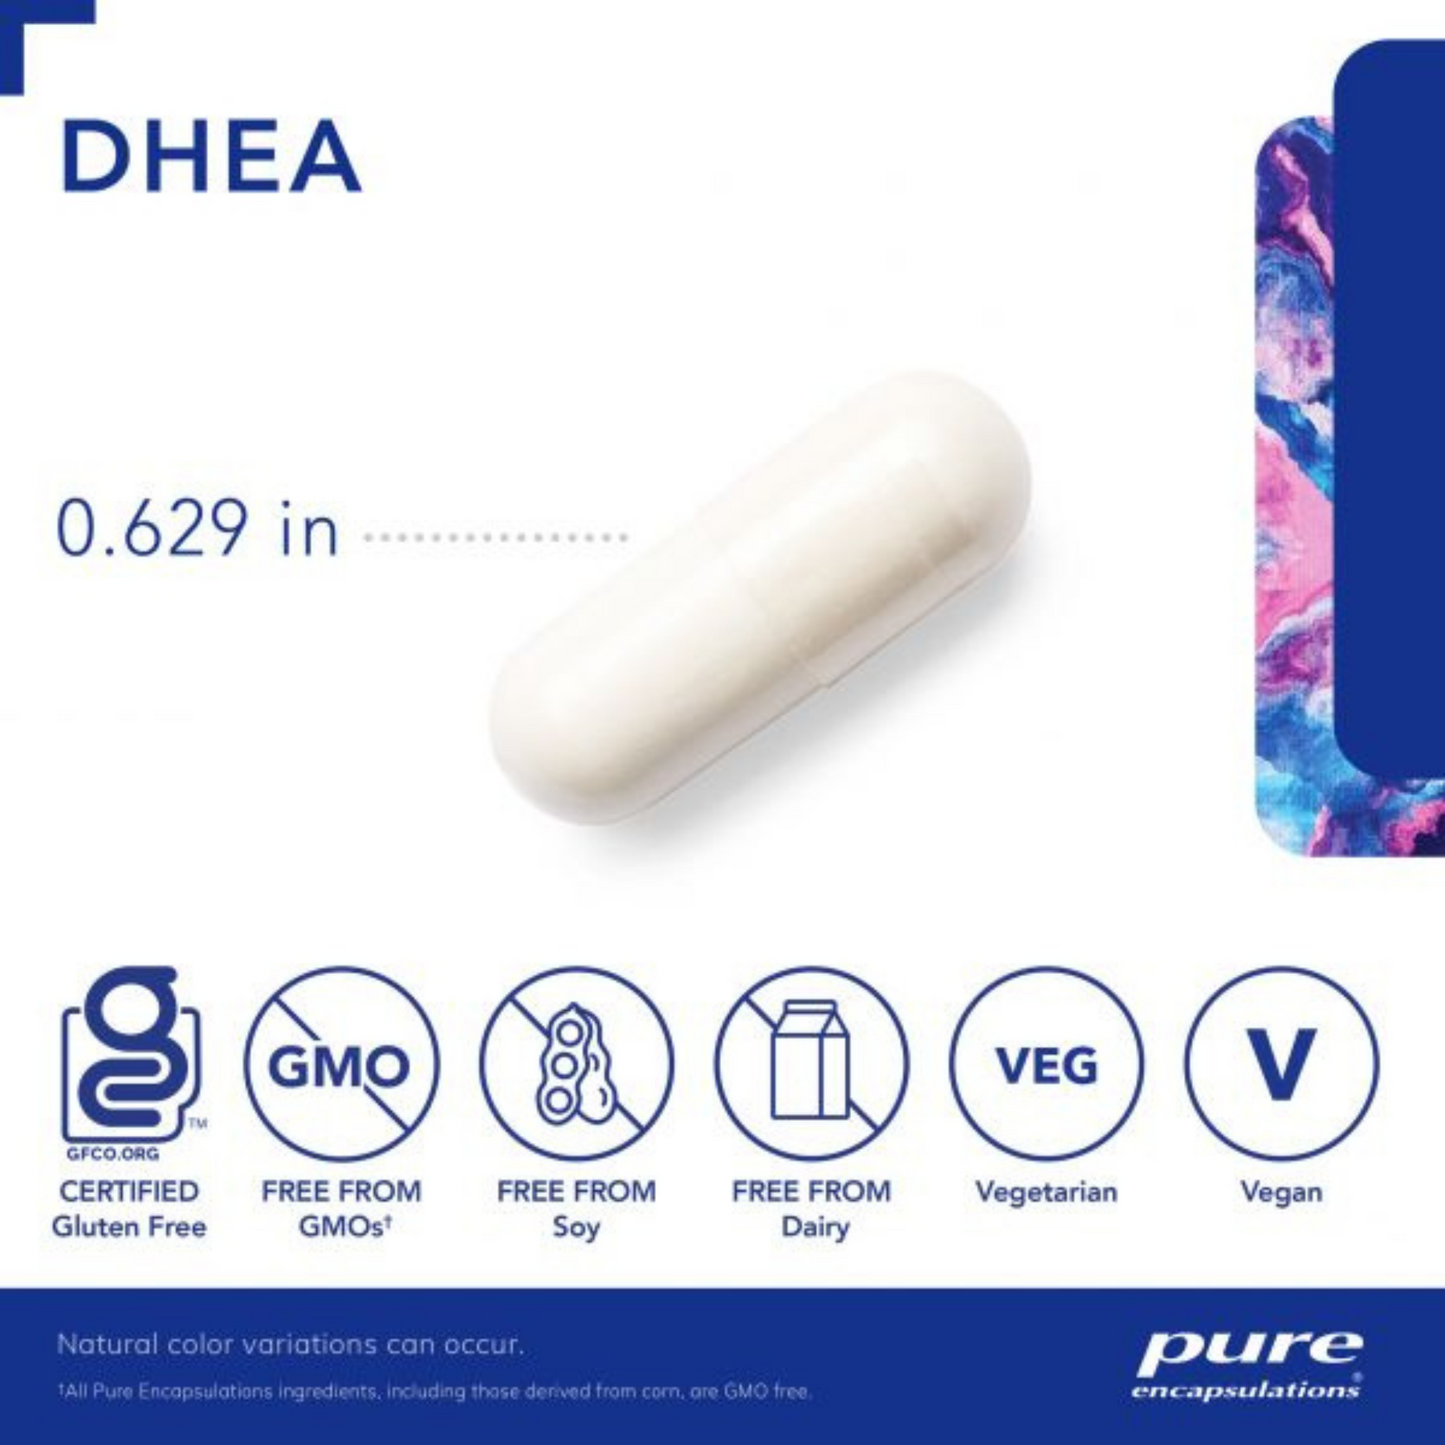 Pure Encapsulations DHEA 25 mg. Capsules (60 count) #10085797